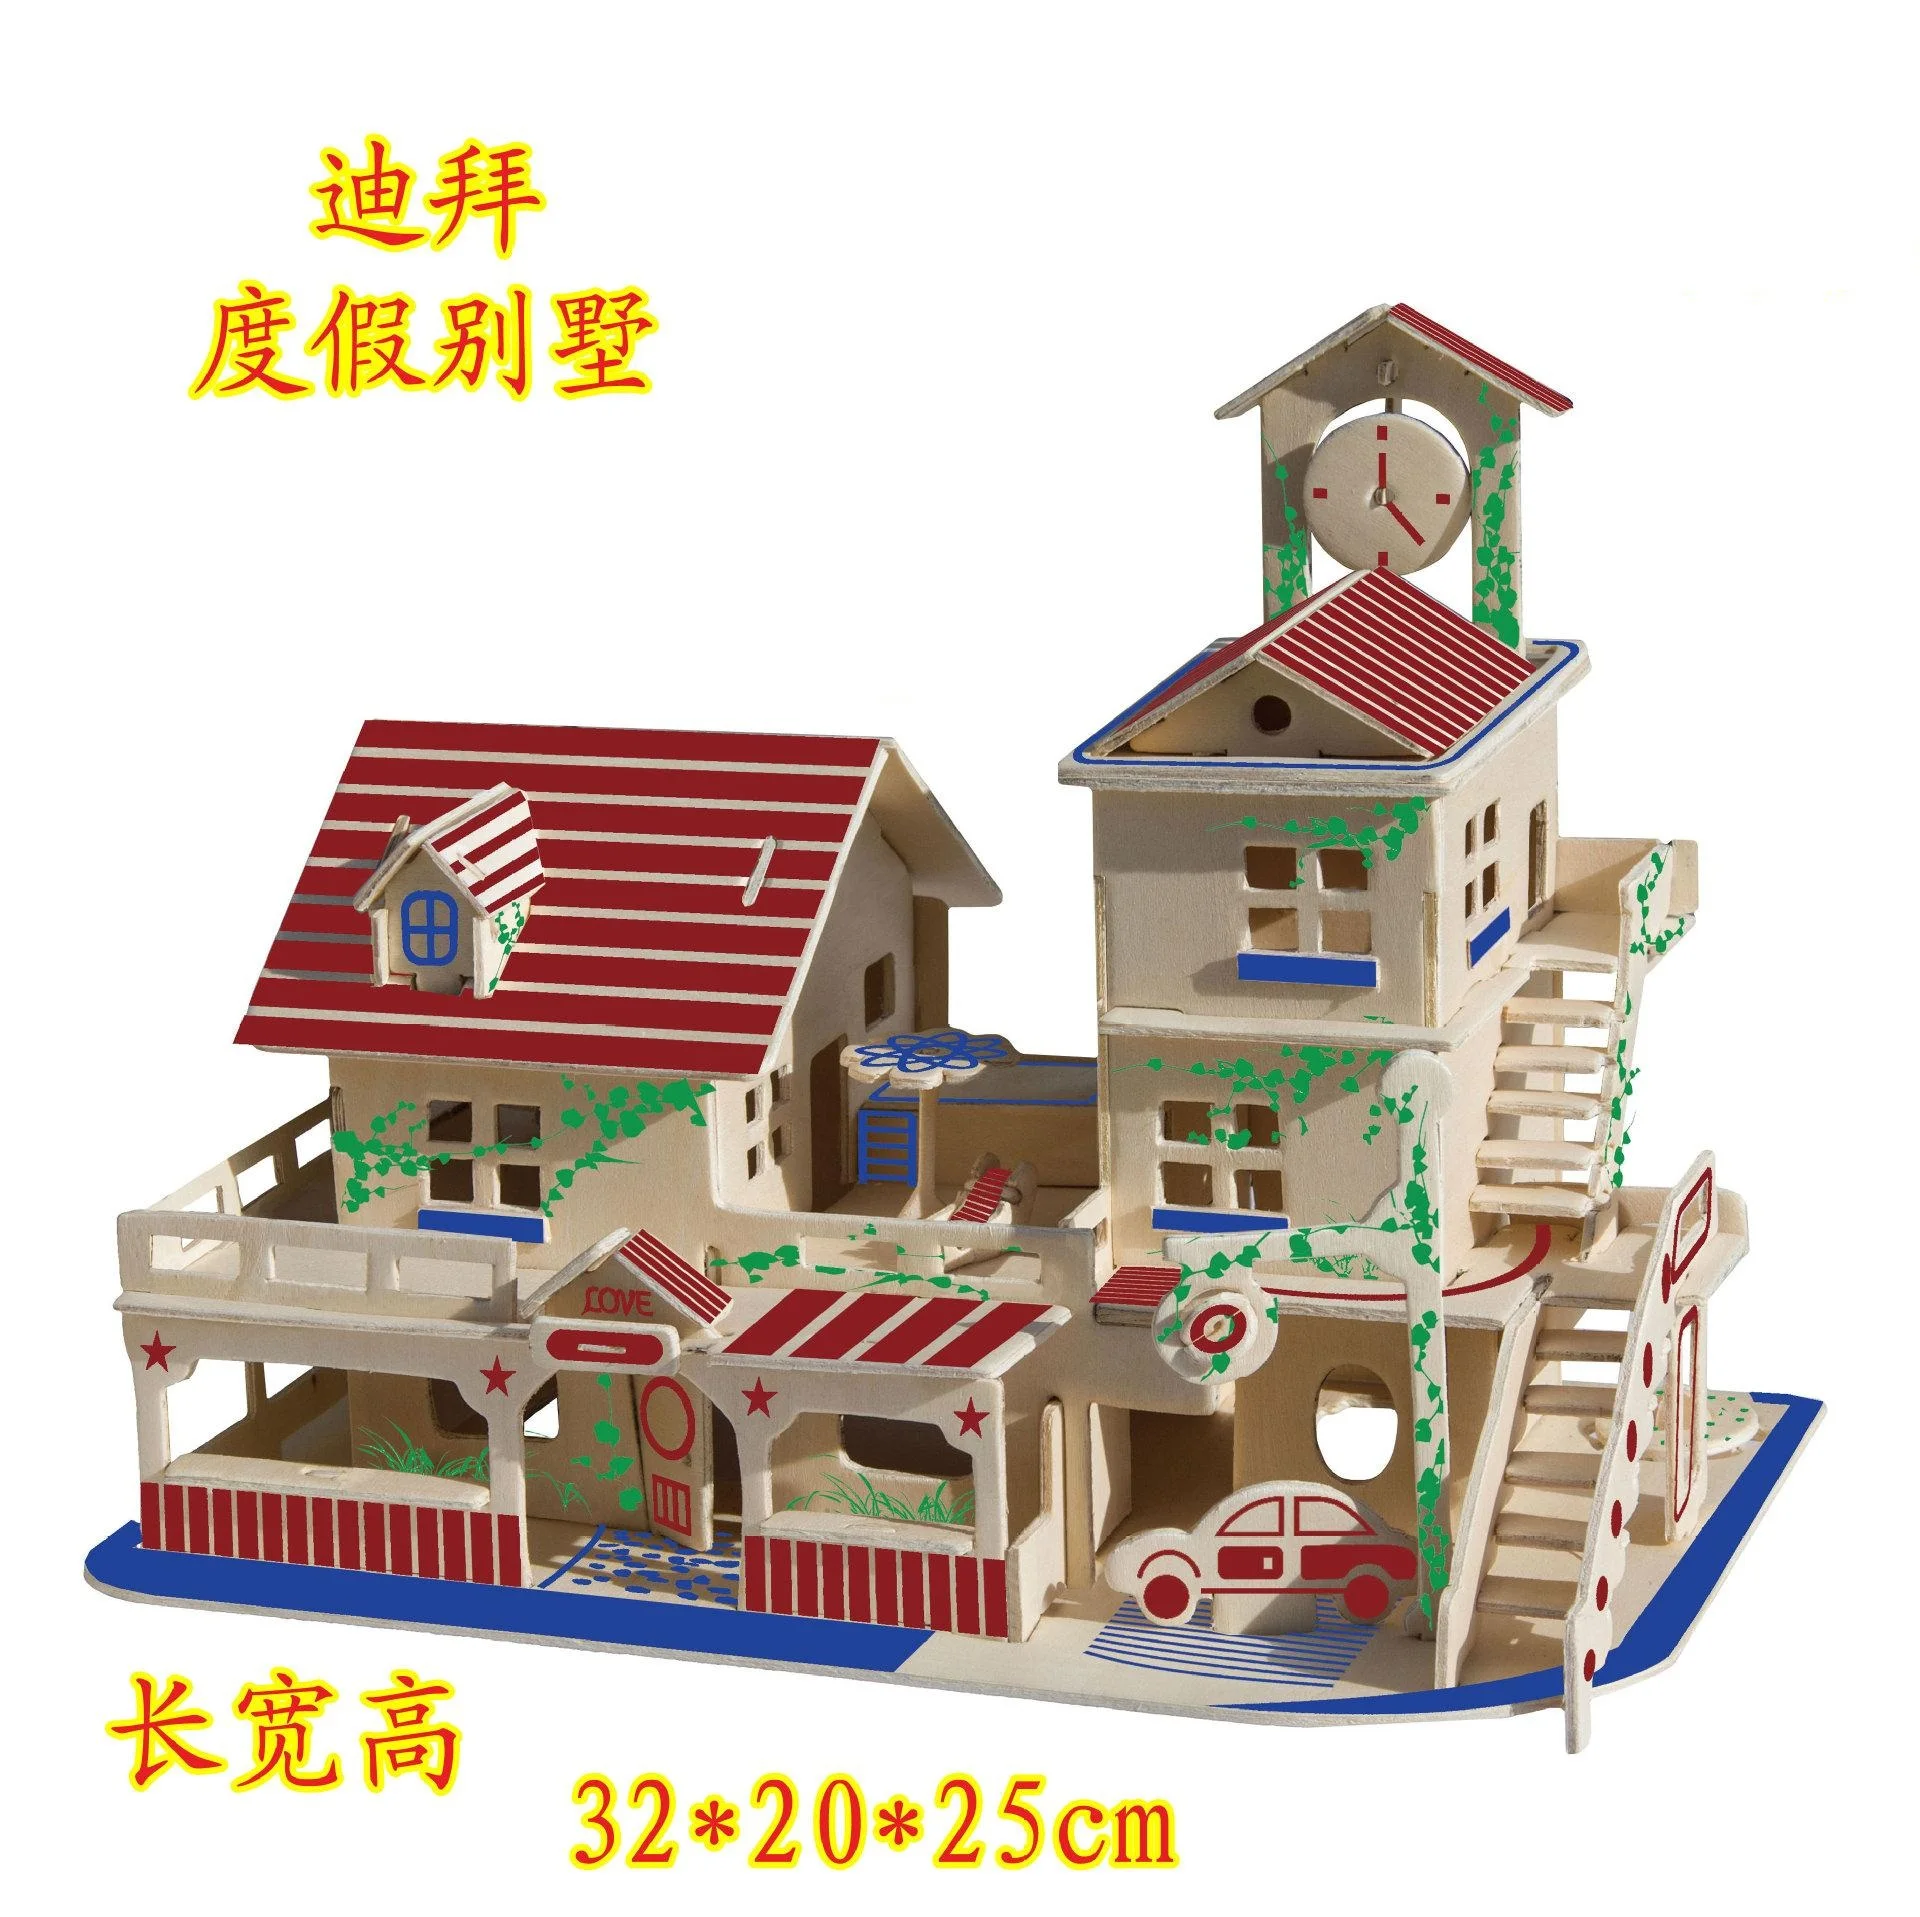 

candice guo! wooden toy 3D puzzle hand work DIY woodcraft assemble kit Dubai holiday villa house birthday Christmas gift 1pc